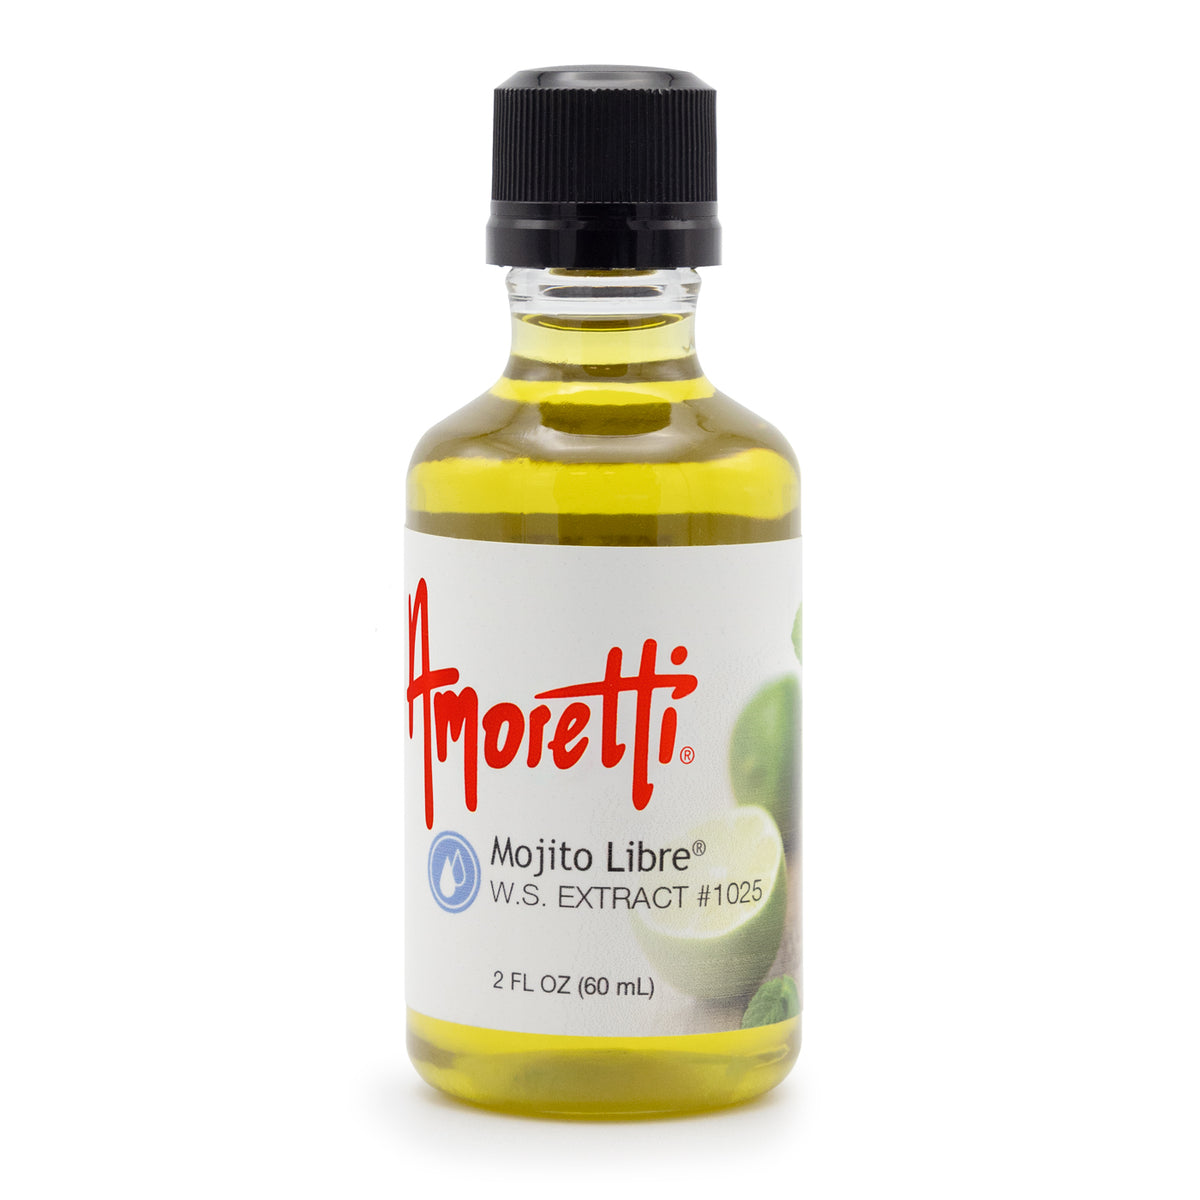 Mojito Libre Extract Water (mint lime) Soluble Amoretti — 